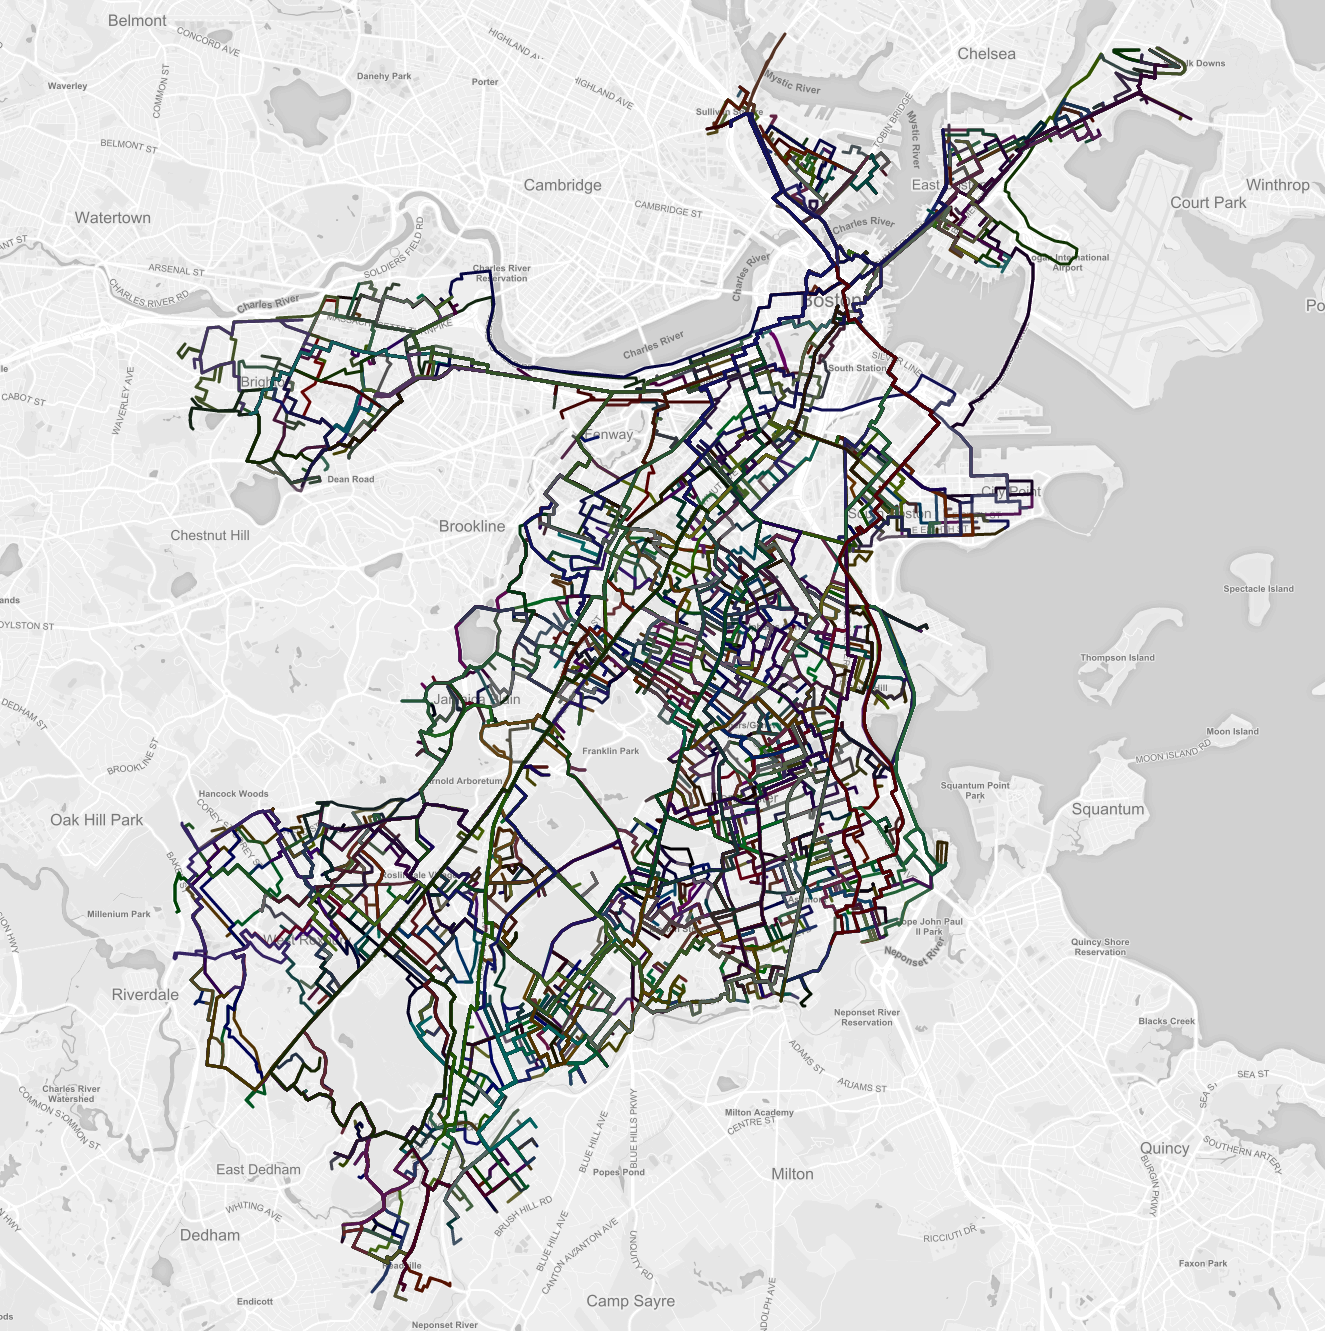 Visualization of generated route data using Leaflet